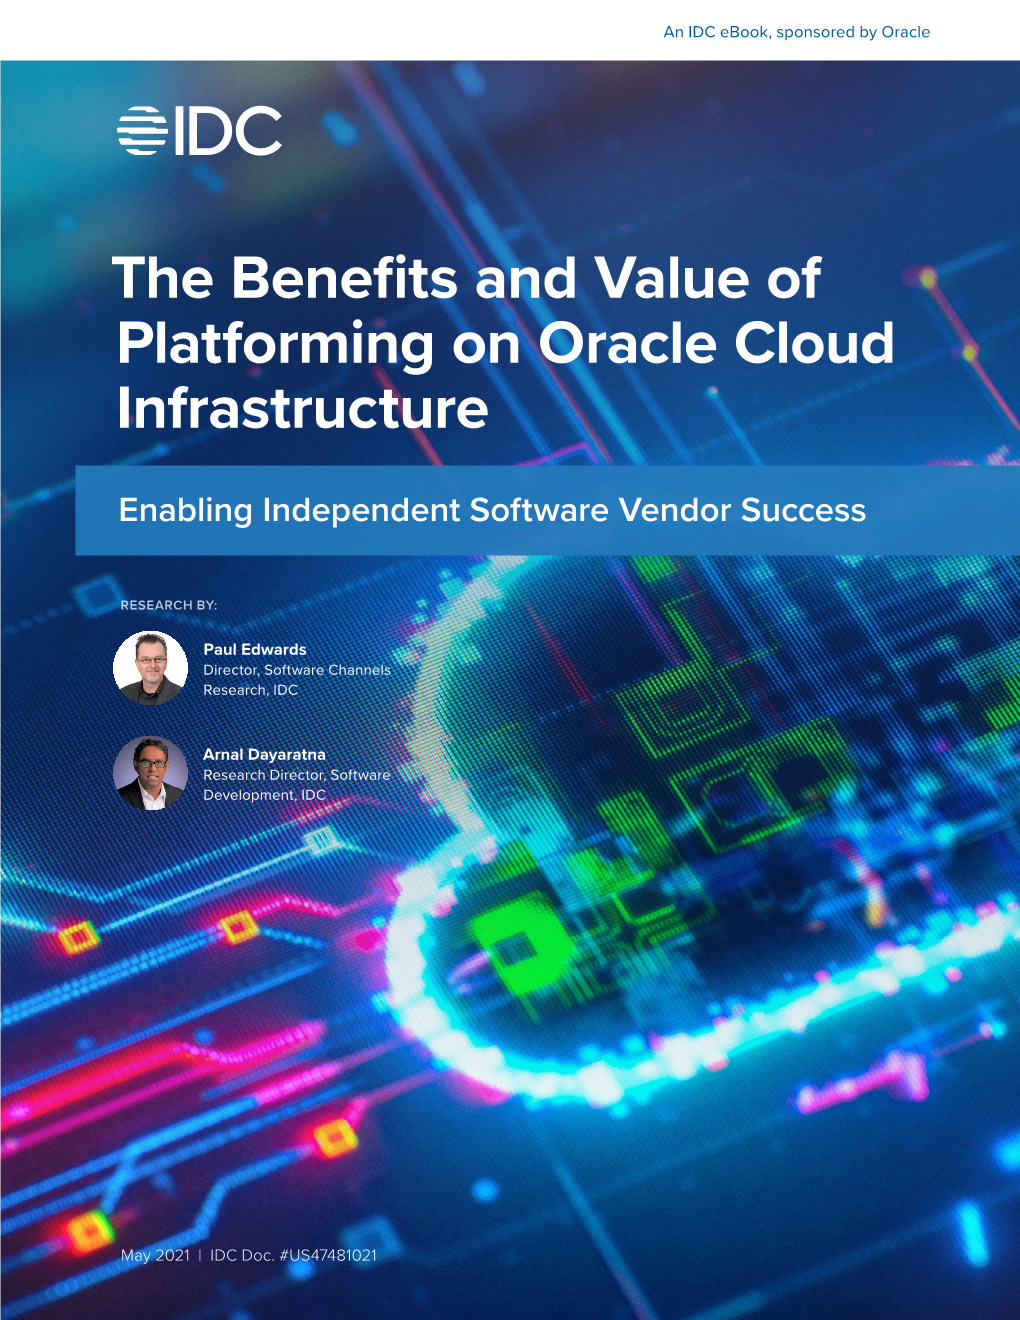 The Benefits and Value of Platforming on Oracle Cloud Infrastructure